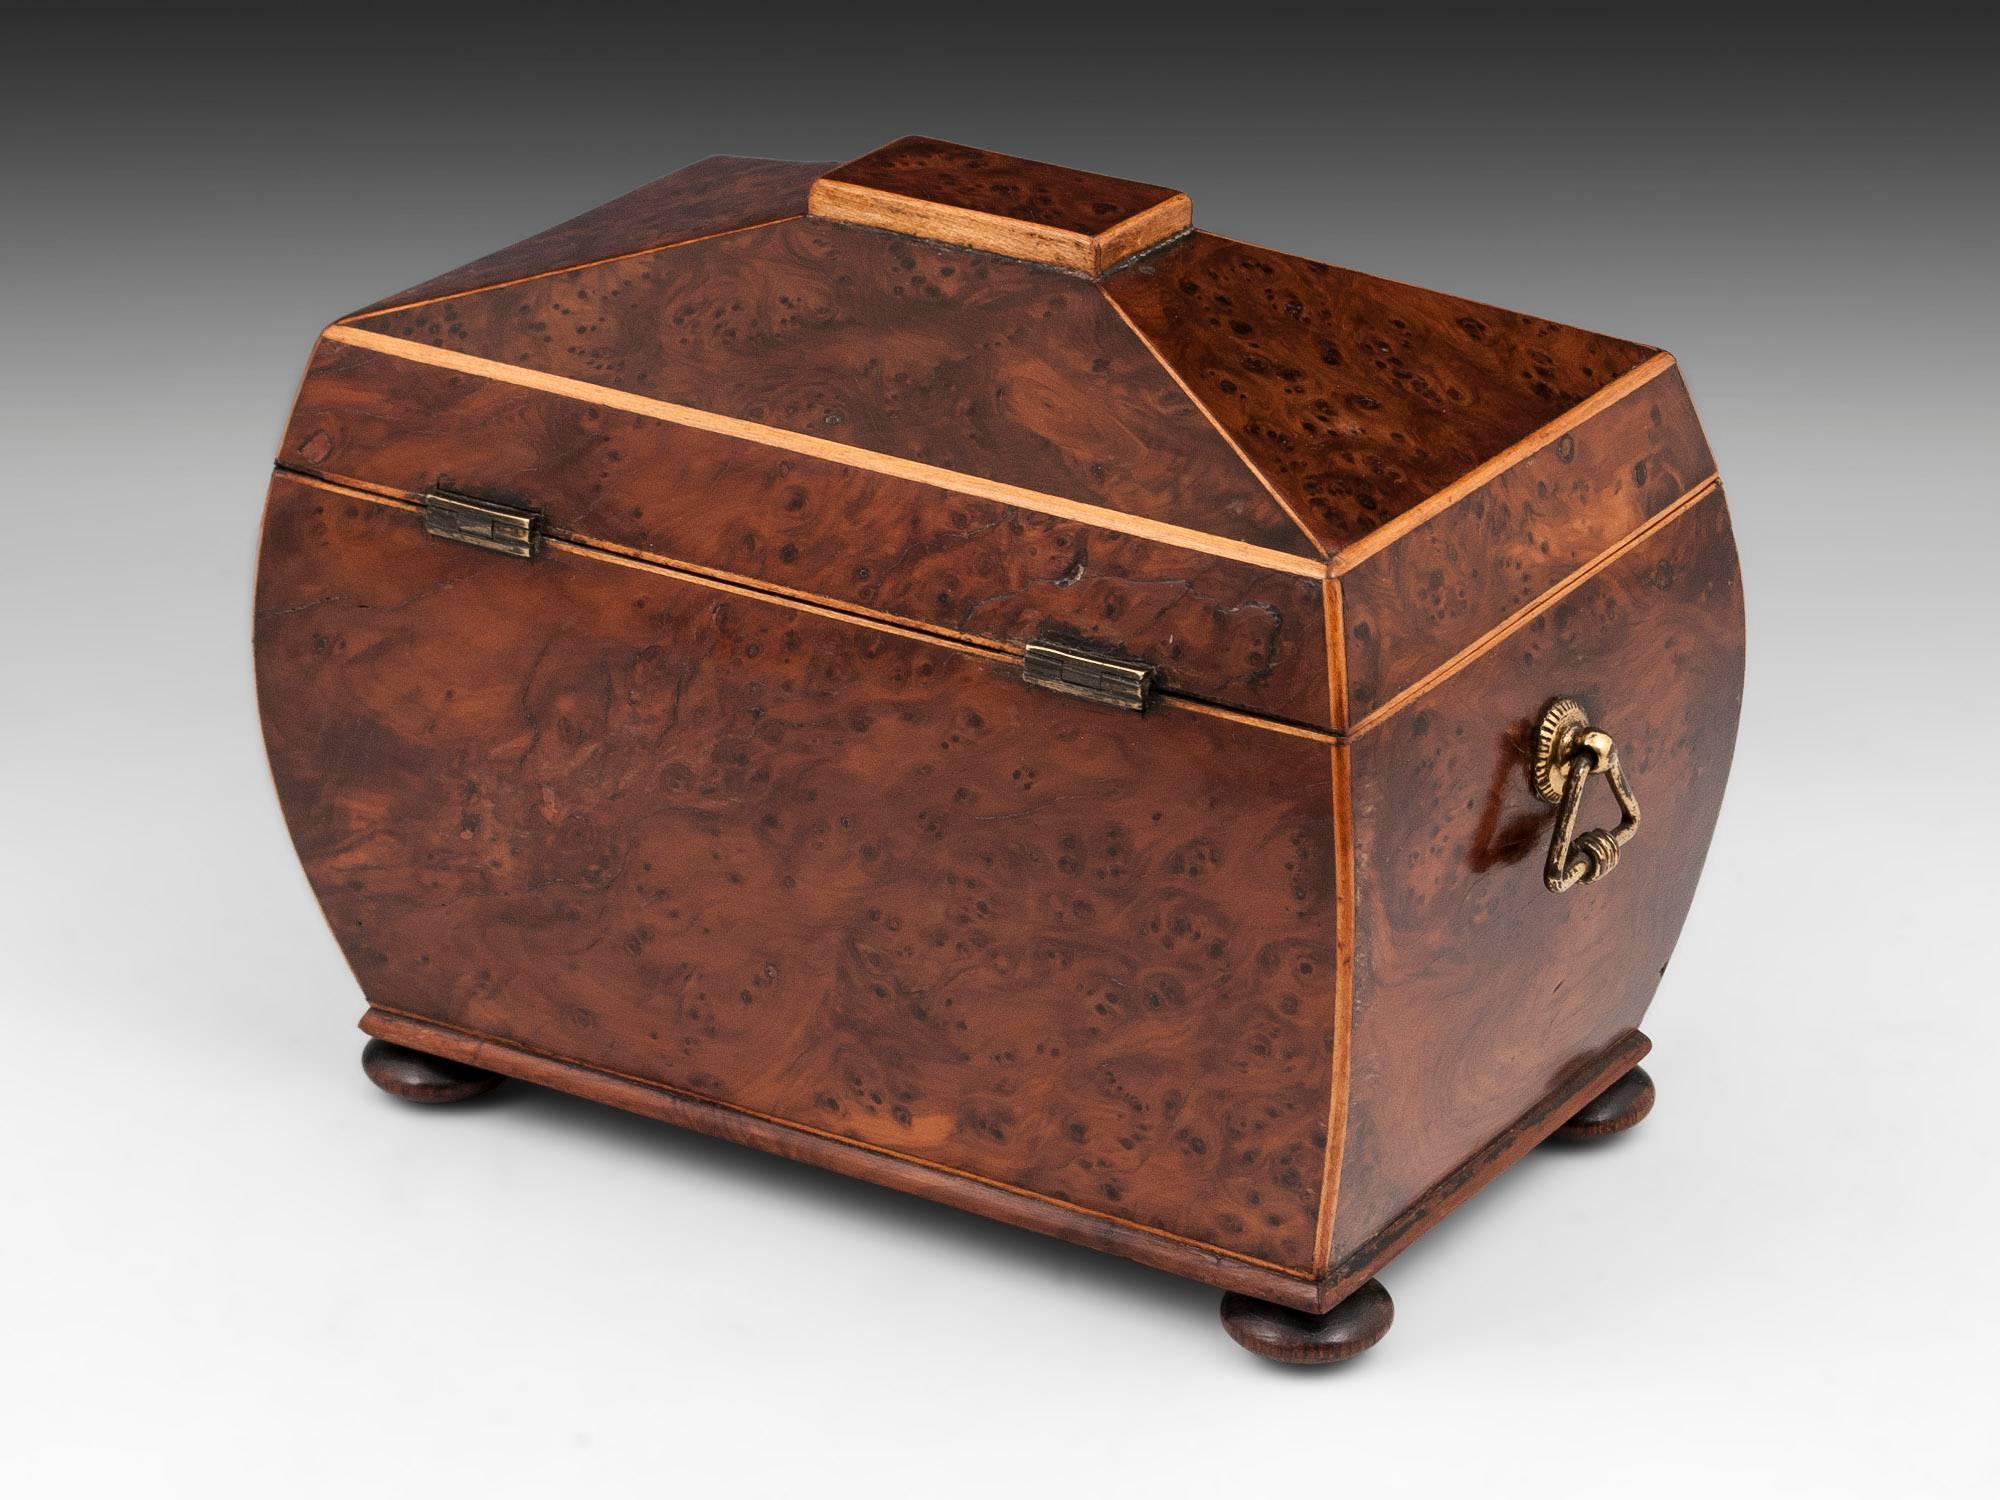 Antique Regency Bombe Shaped Burr Yew Tea Caddy In Good Condition For Sale In Northampton, United Kingdom